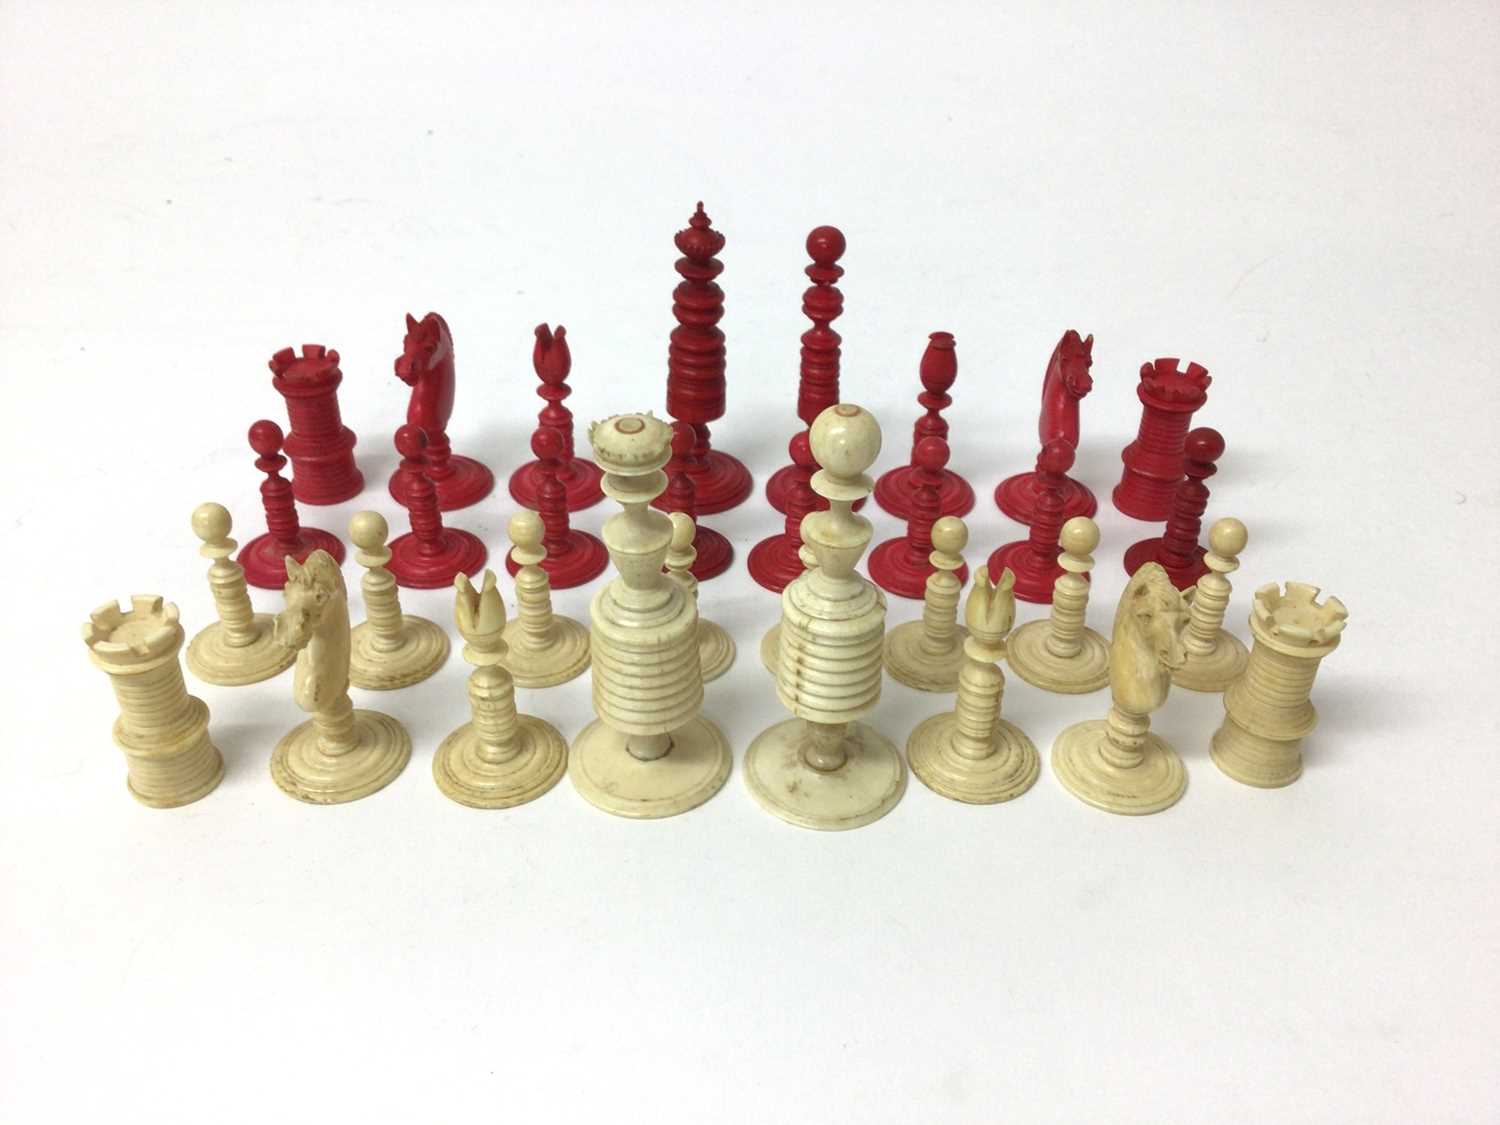 Lot 96 - Complete set of 19th century bone and red stained ivory chess pieces